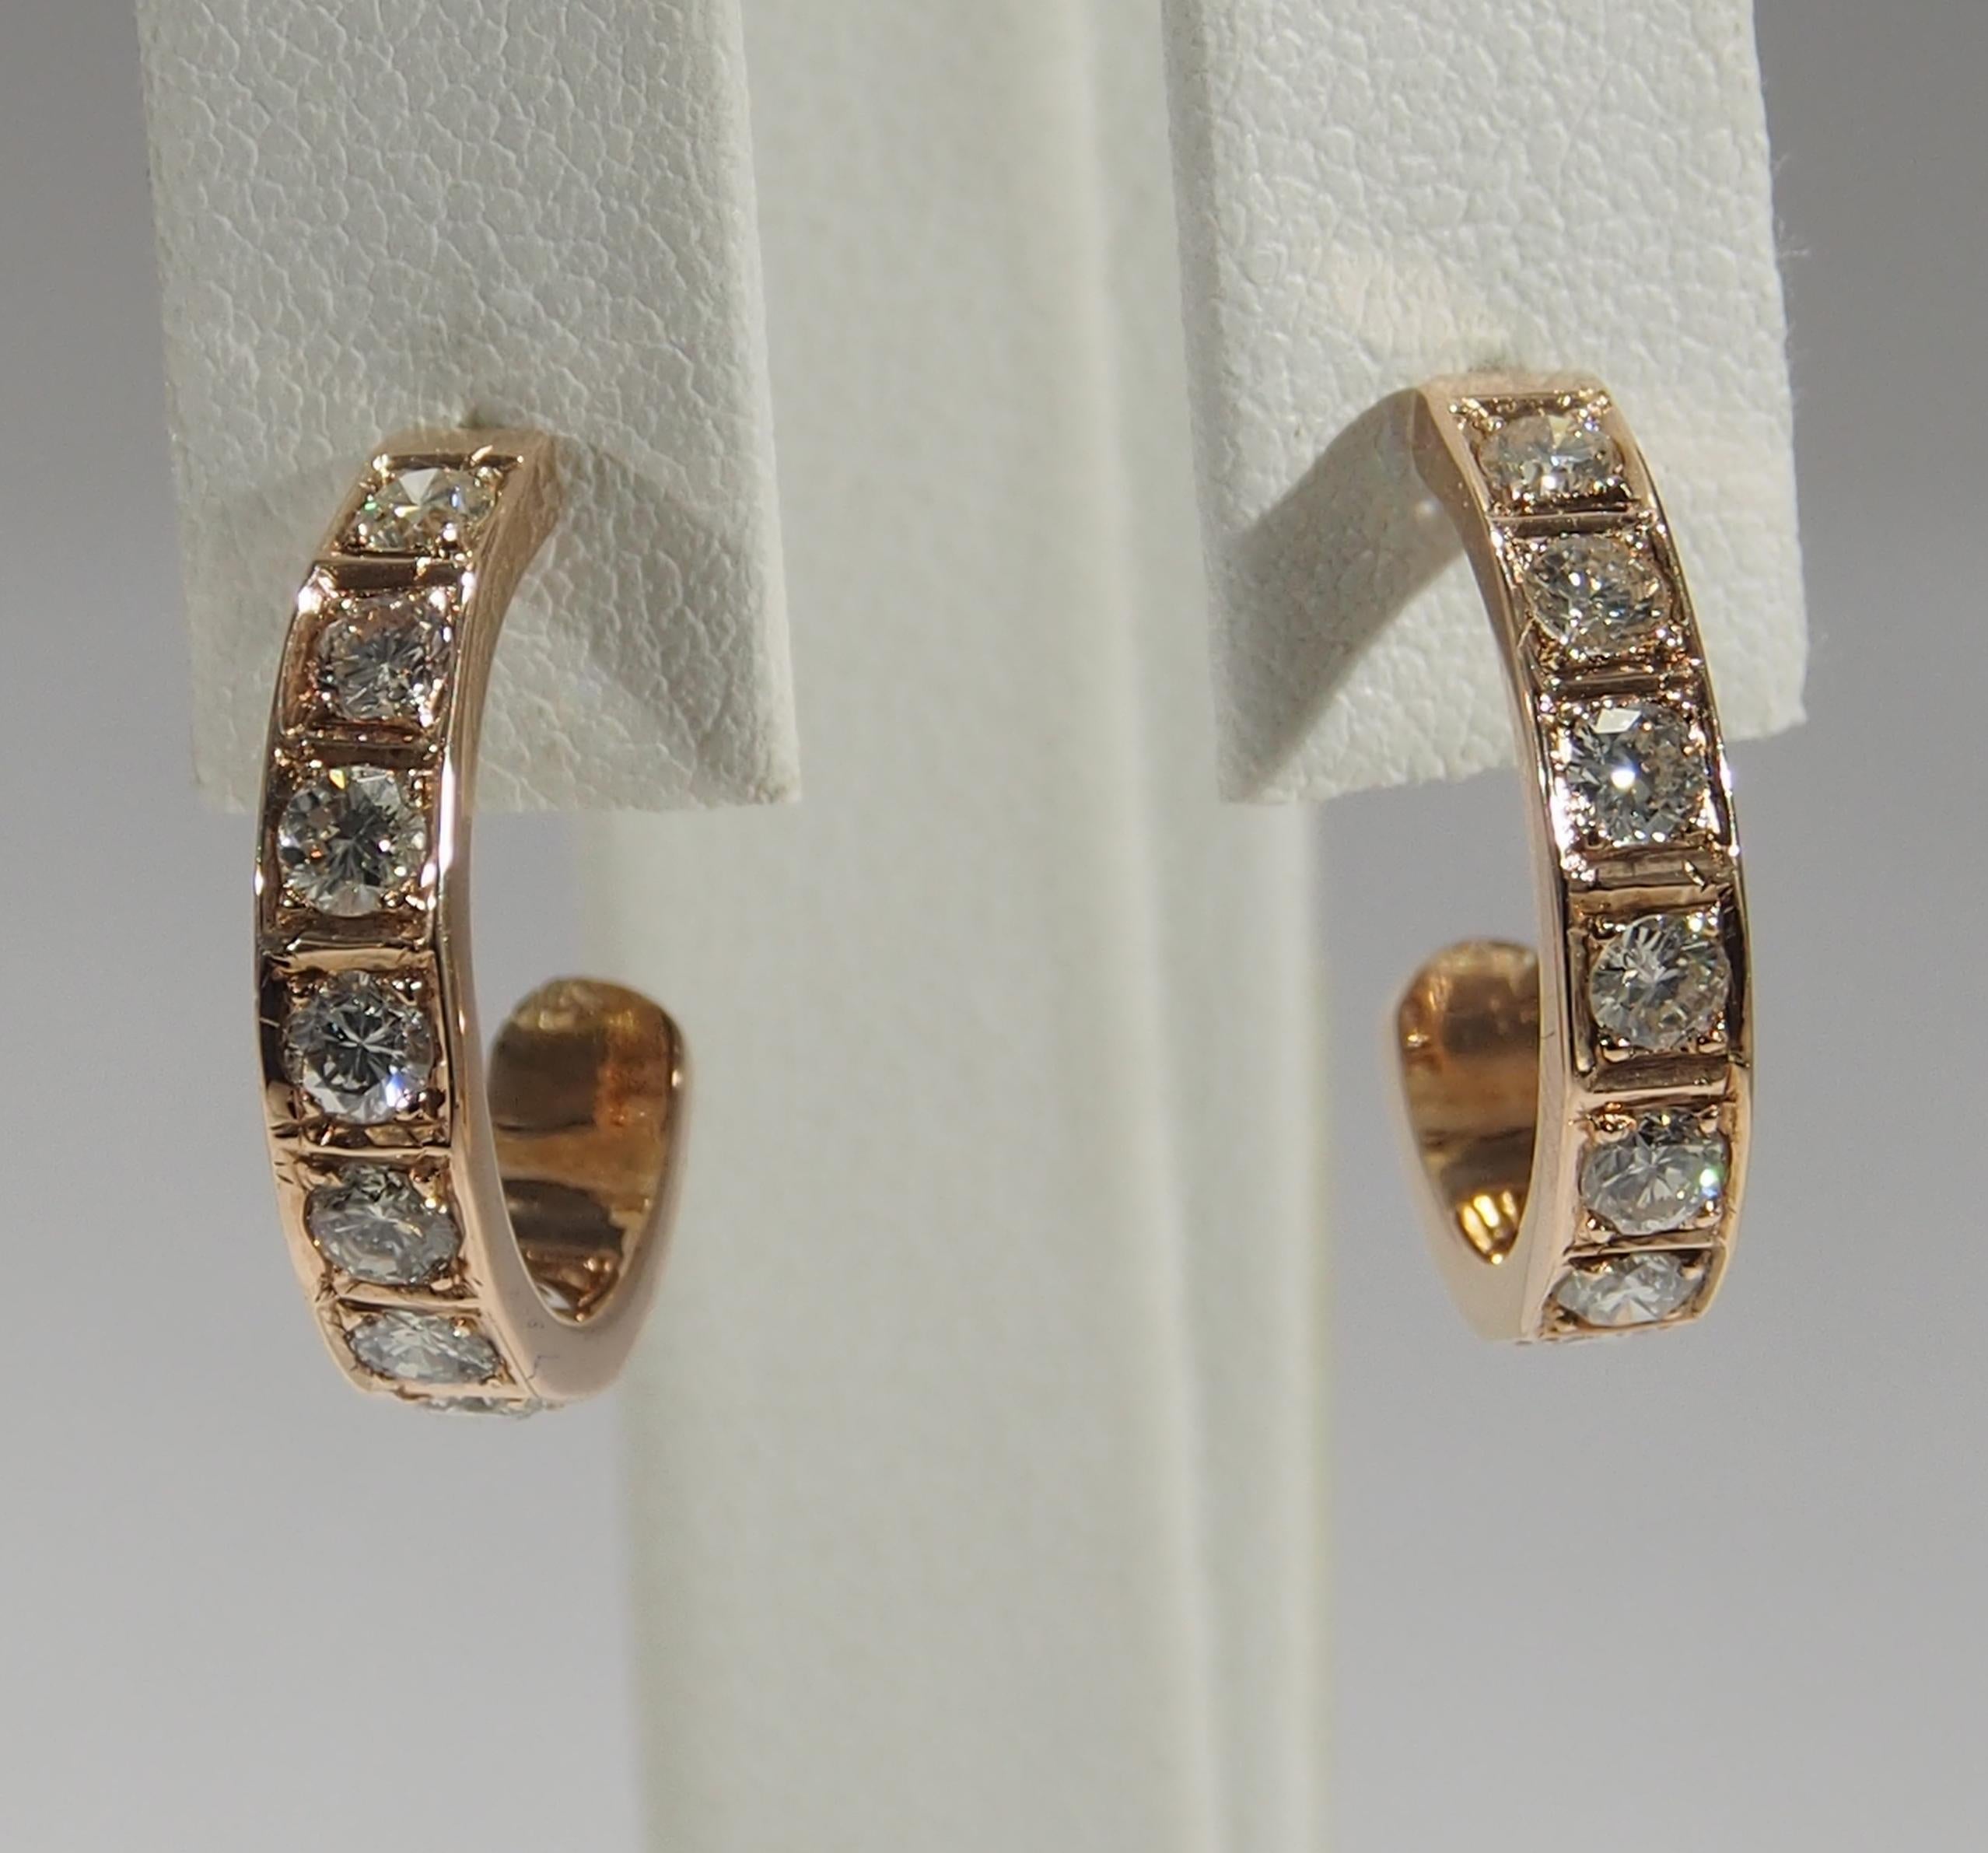 A classic vintage pair of 12K Rose Gold Half-Hoop Earrings. Prong set with (8) Round Brilliant Cut Diamonds G-H in color VS-SI in quality and approximately 1.32ctw. The gold weighs approximately 4.35 grams and are 1 1/8